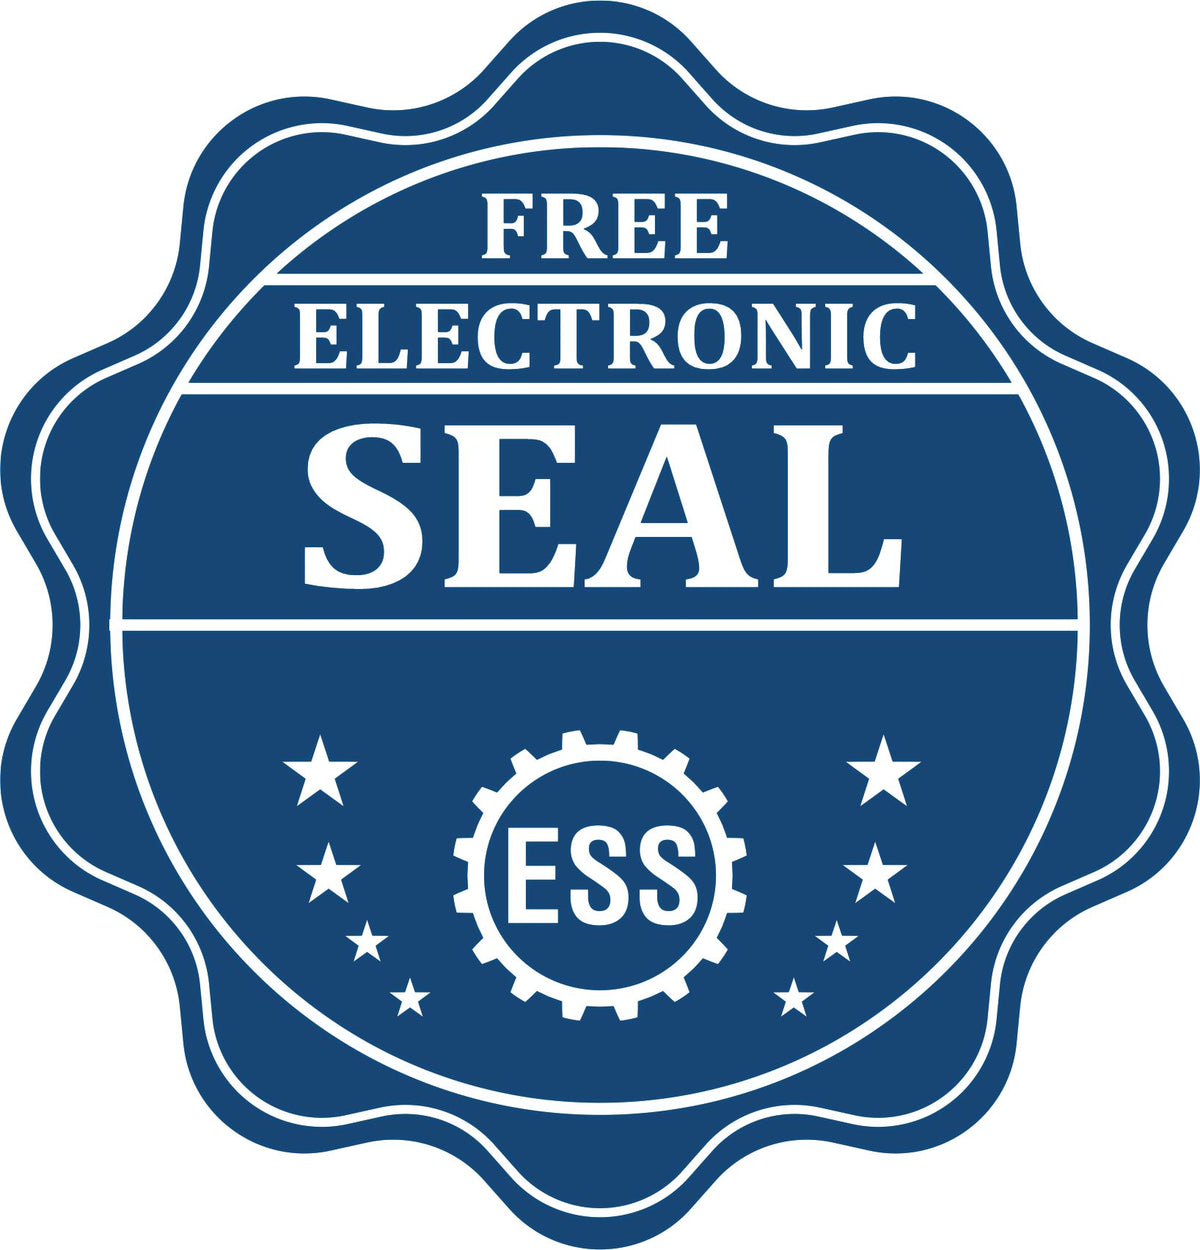 A badge showing a free electronic seal for the Gift Mississippi Architect Seal with stars and the ESS gear on the emblem.